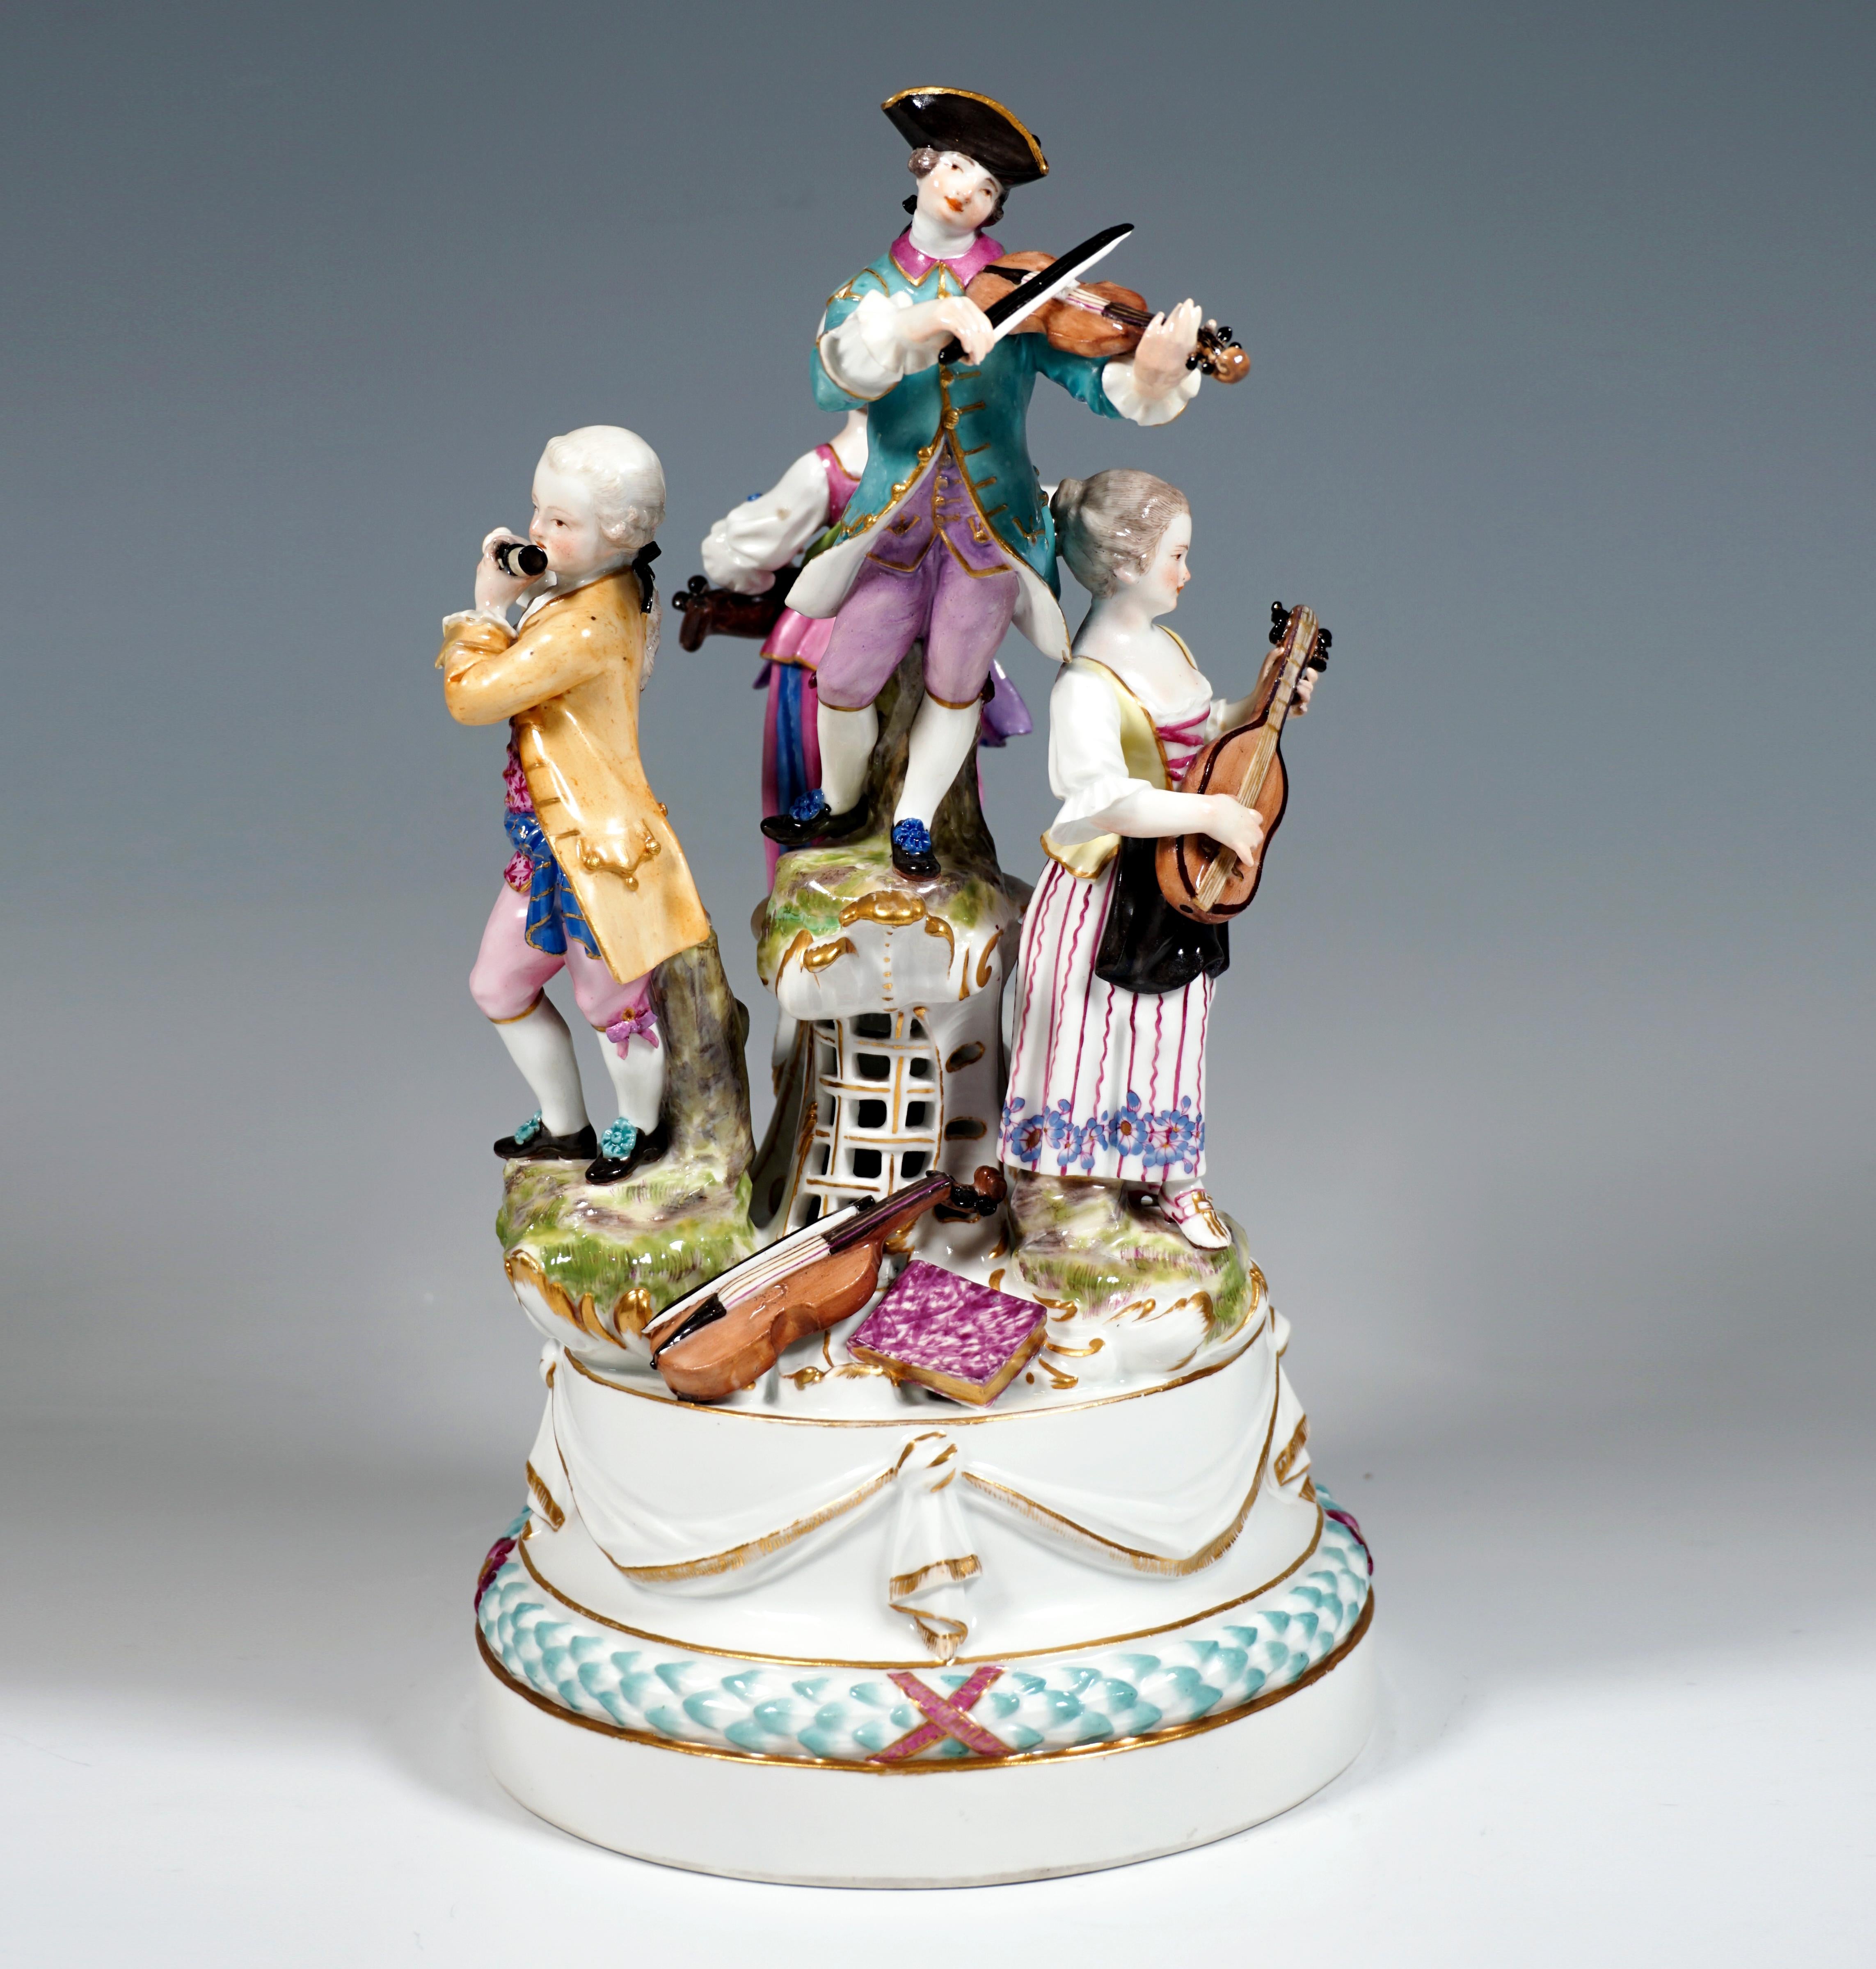 Elaborately crafted porcelain group from the 18th century:
Four musicians in festive, rural Rococo clothing on a high round base, adorned with a three-dimensional wreath of leaves and festively knotted white cloth with gold decoration. On the base